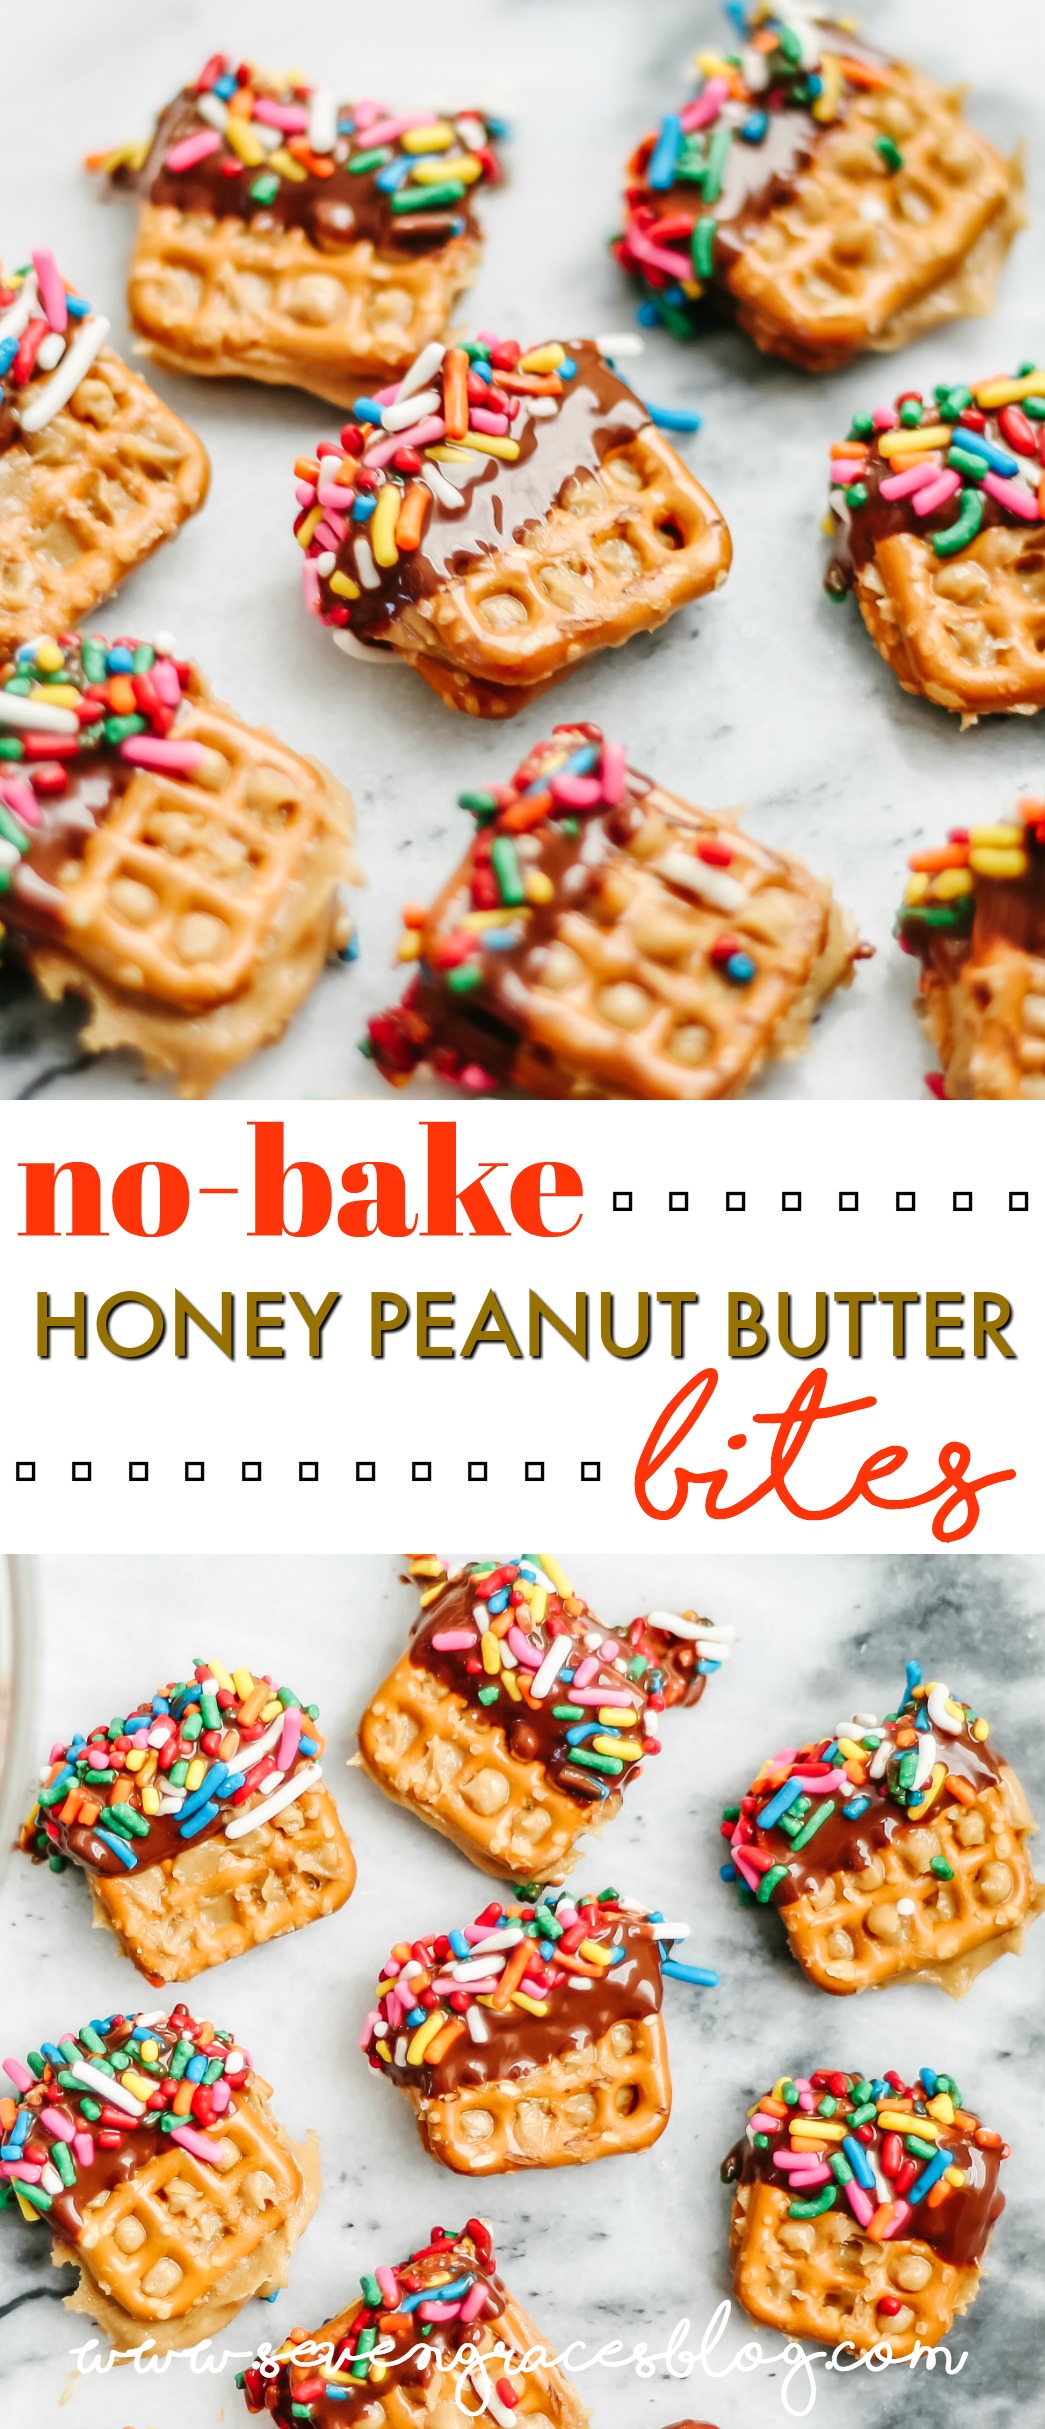 Best no-bake, honey peanut butter bites perfect for an after school snack! So easy and so yummy! #snacks #nobake #pretzelsnacks #peanutbutter #honey